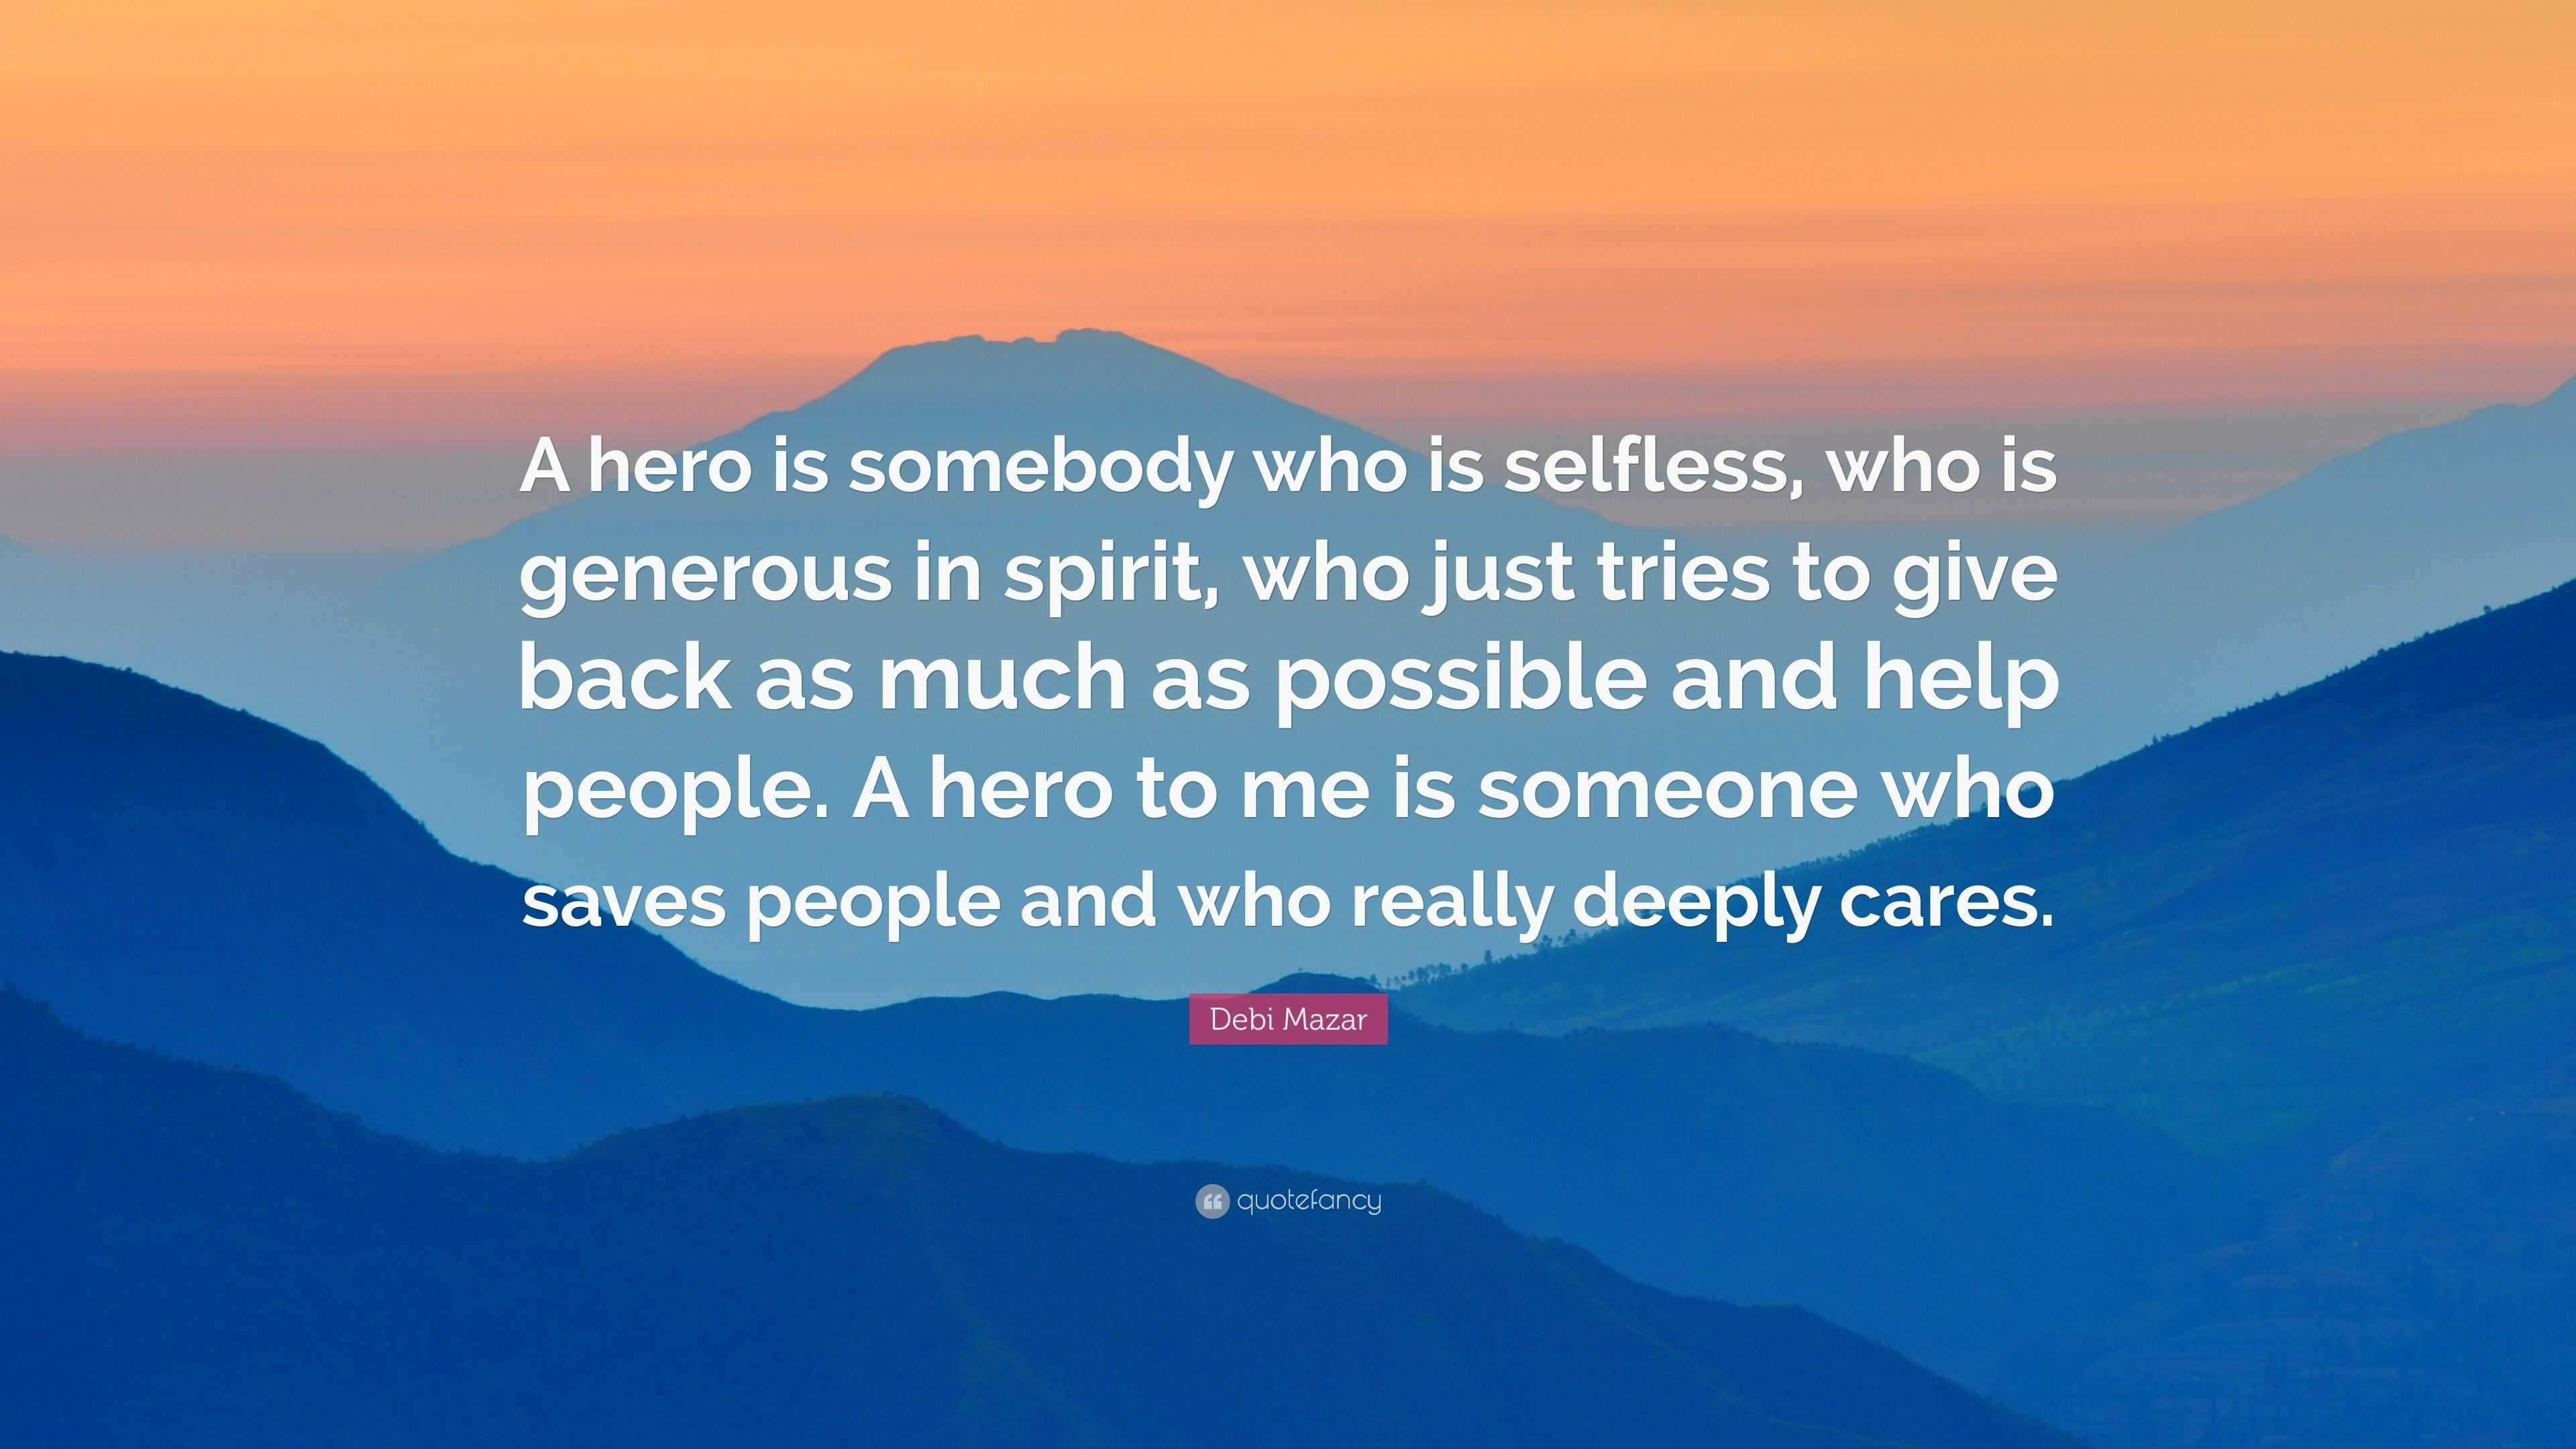 Debi Mazar Quote: “A hero is somebody who is selfless, who is generous ...